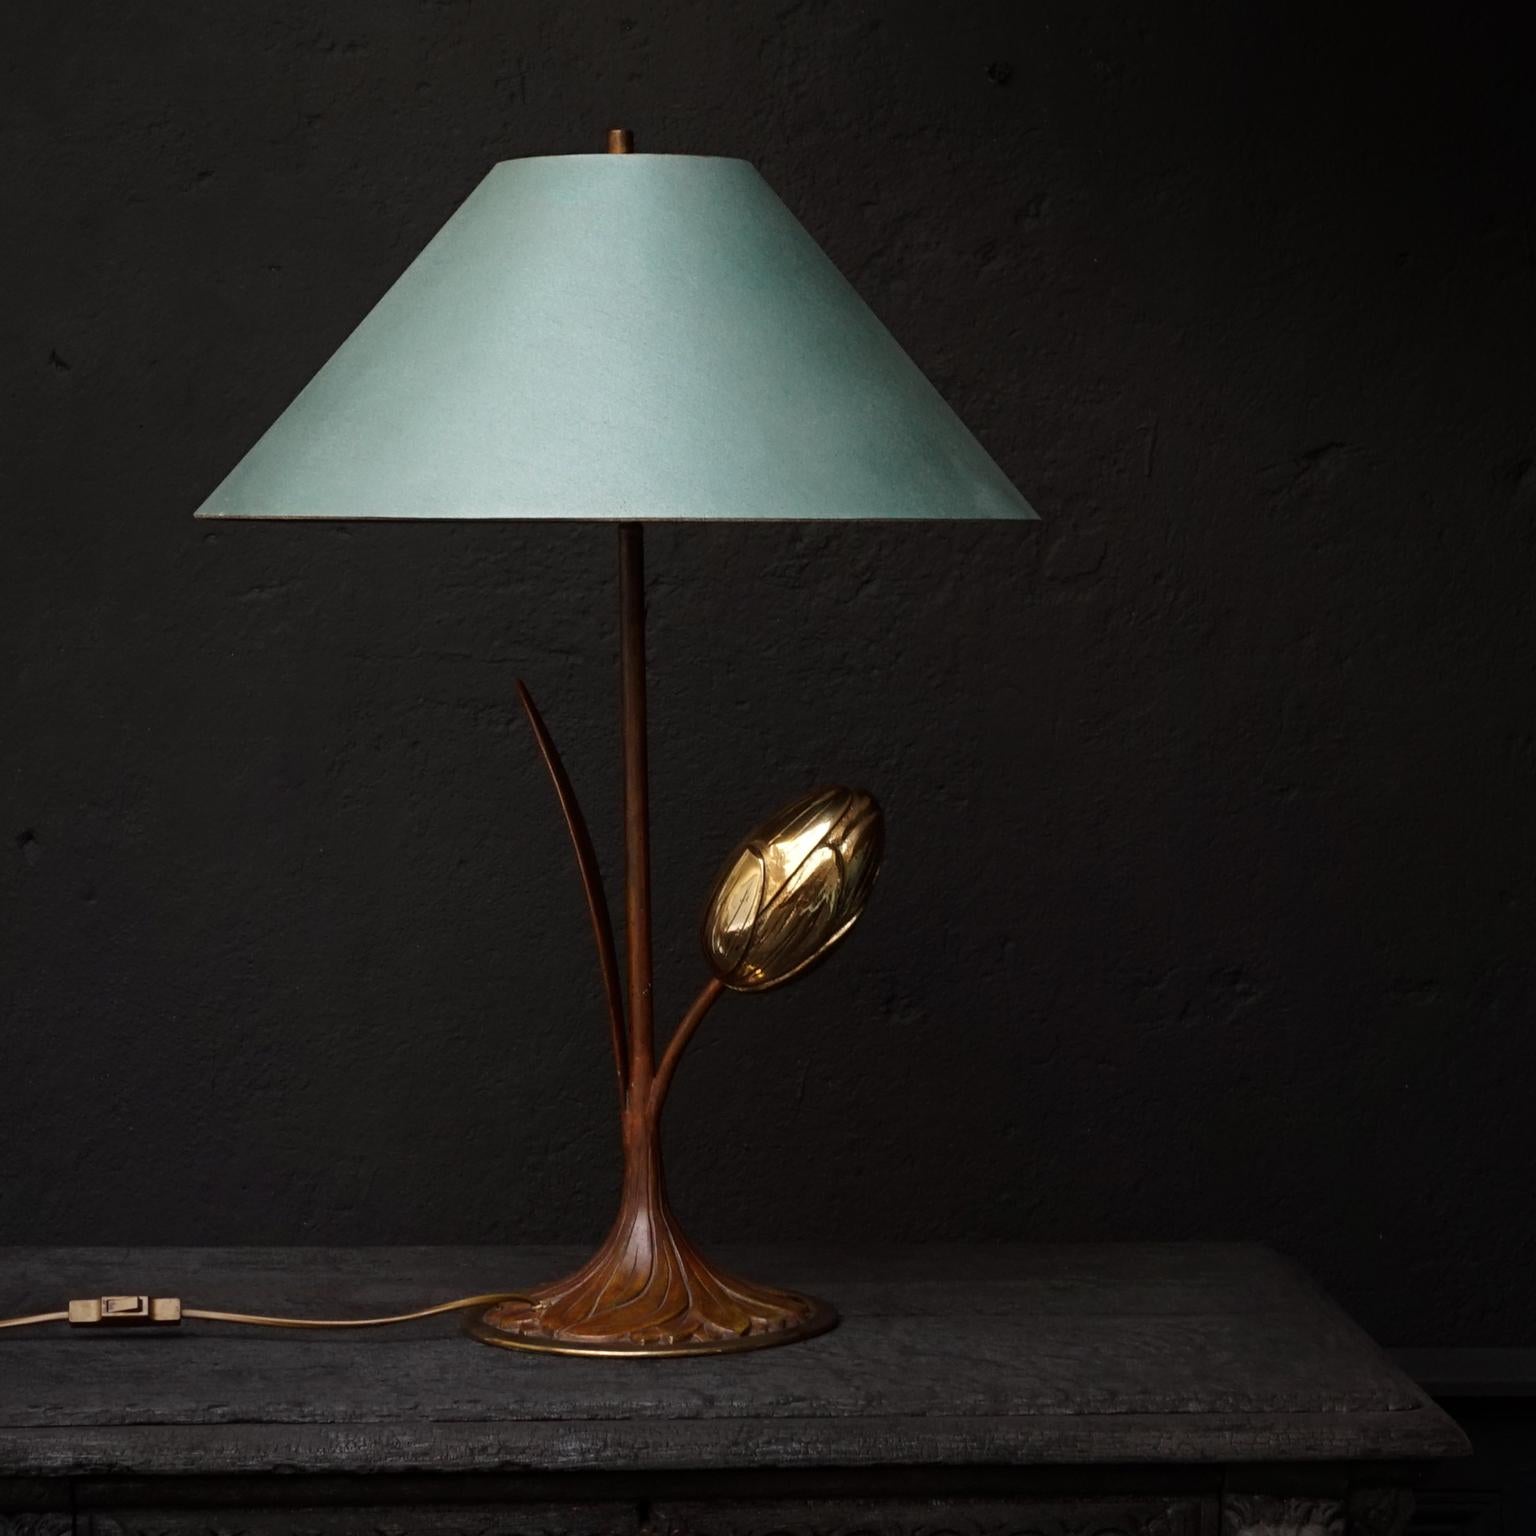 Another vintage find I could not resist, you can see why.
It's a high quality heavy brass lamp with a tulip shaped flower bud and a leaf, this lamp is completely original and in very good condition. 

This beautiful sculptural flower table lamp